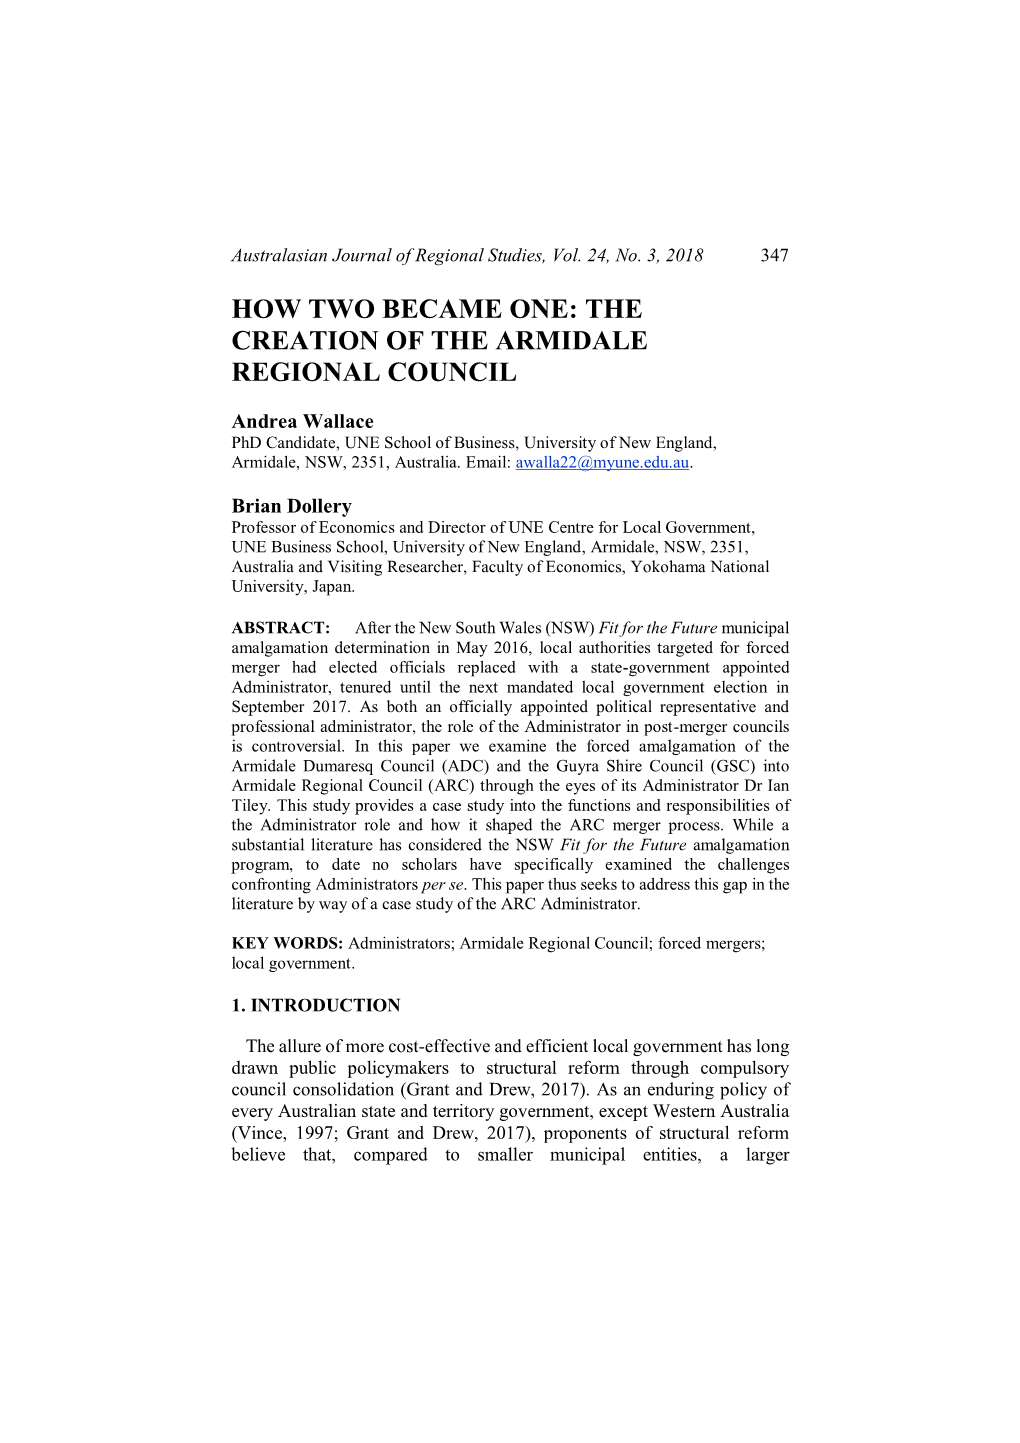 The Creation of the Armidale Regional Council